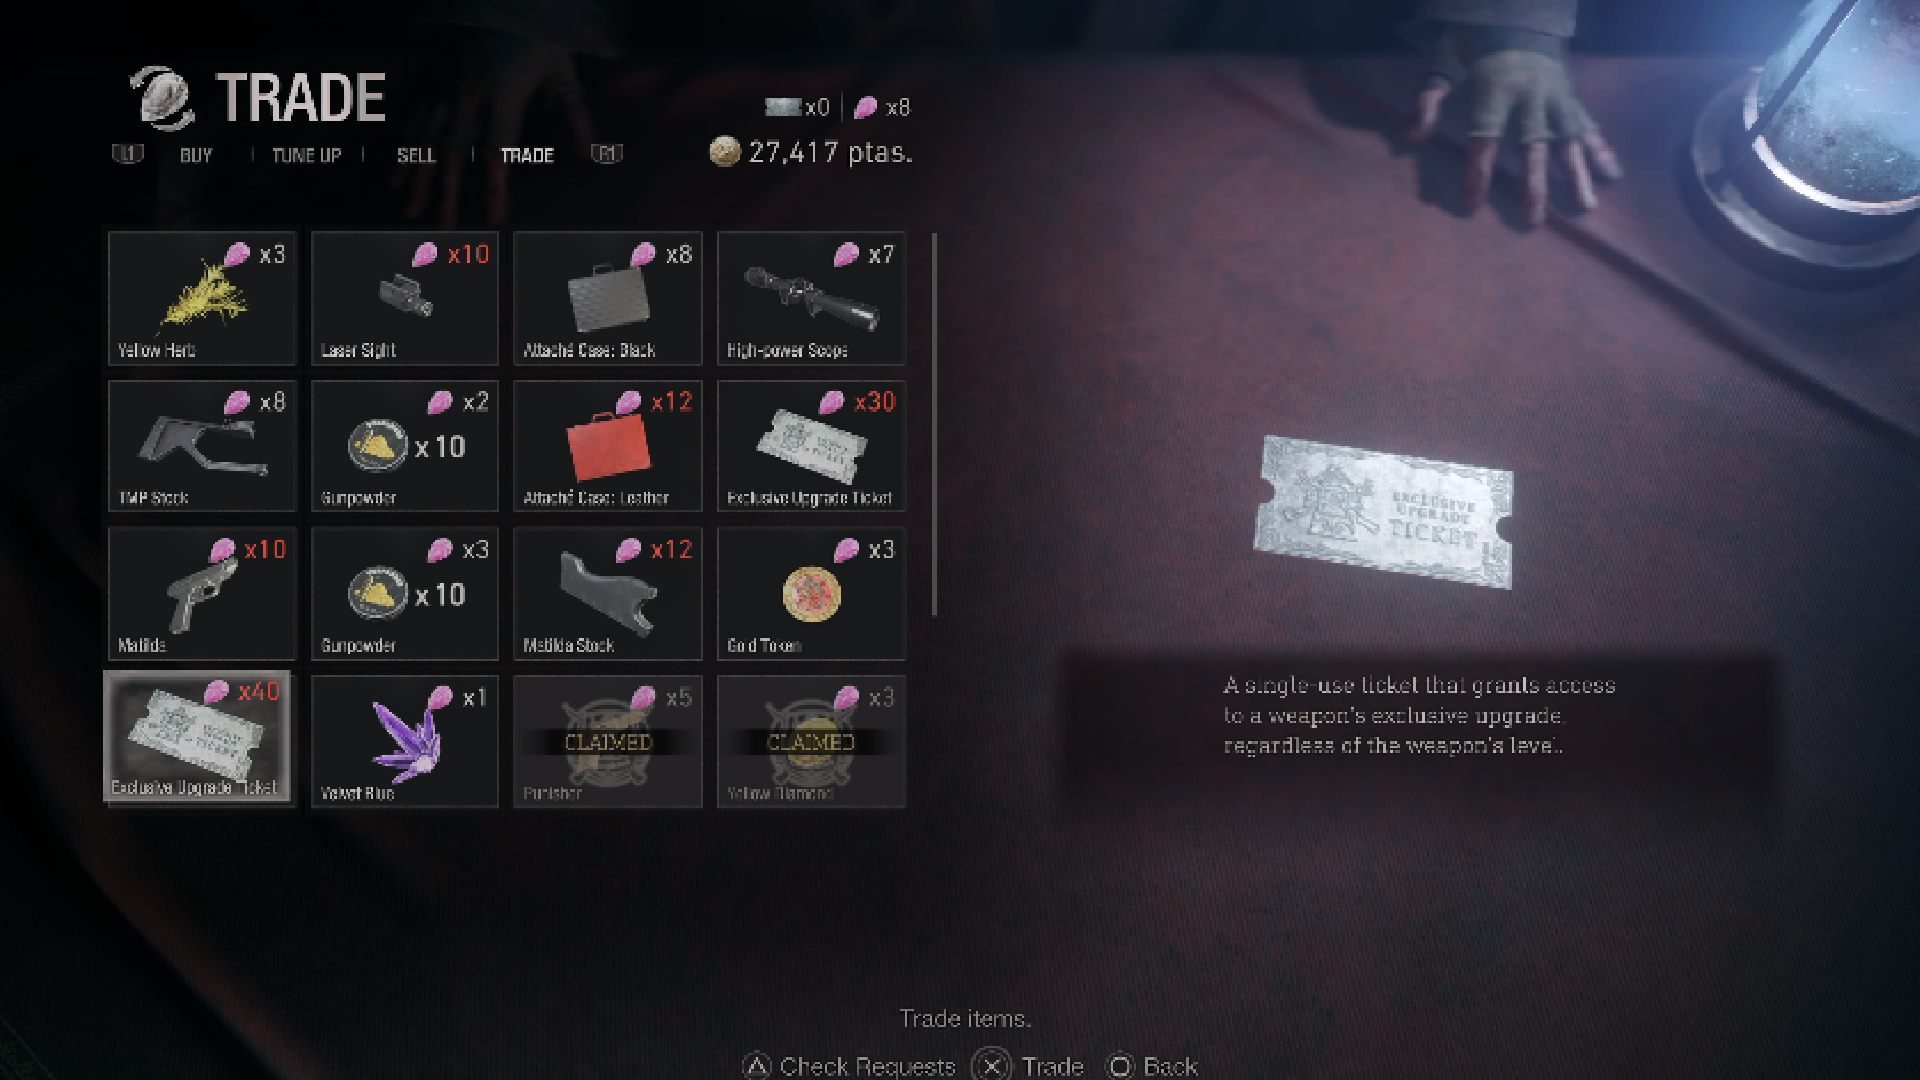 Resident Evil 4 Remake Spinel: the menu in the Merchant can be seen